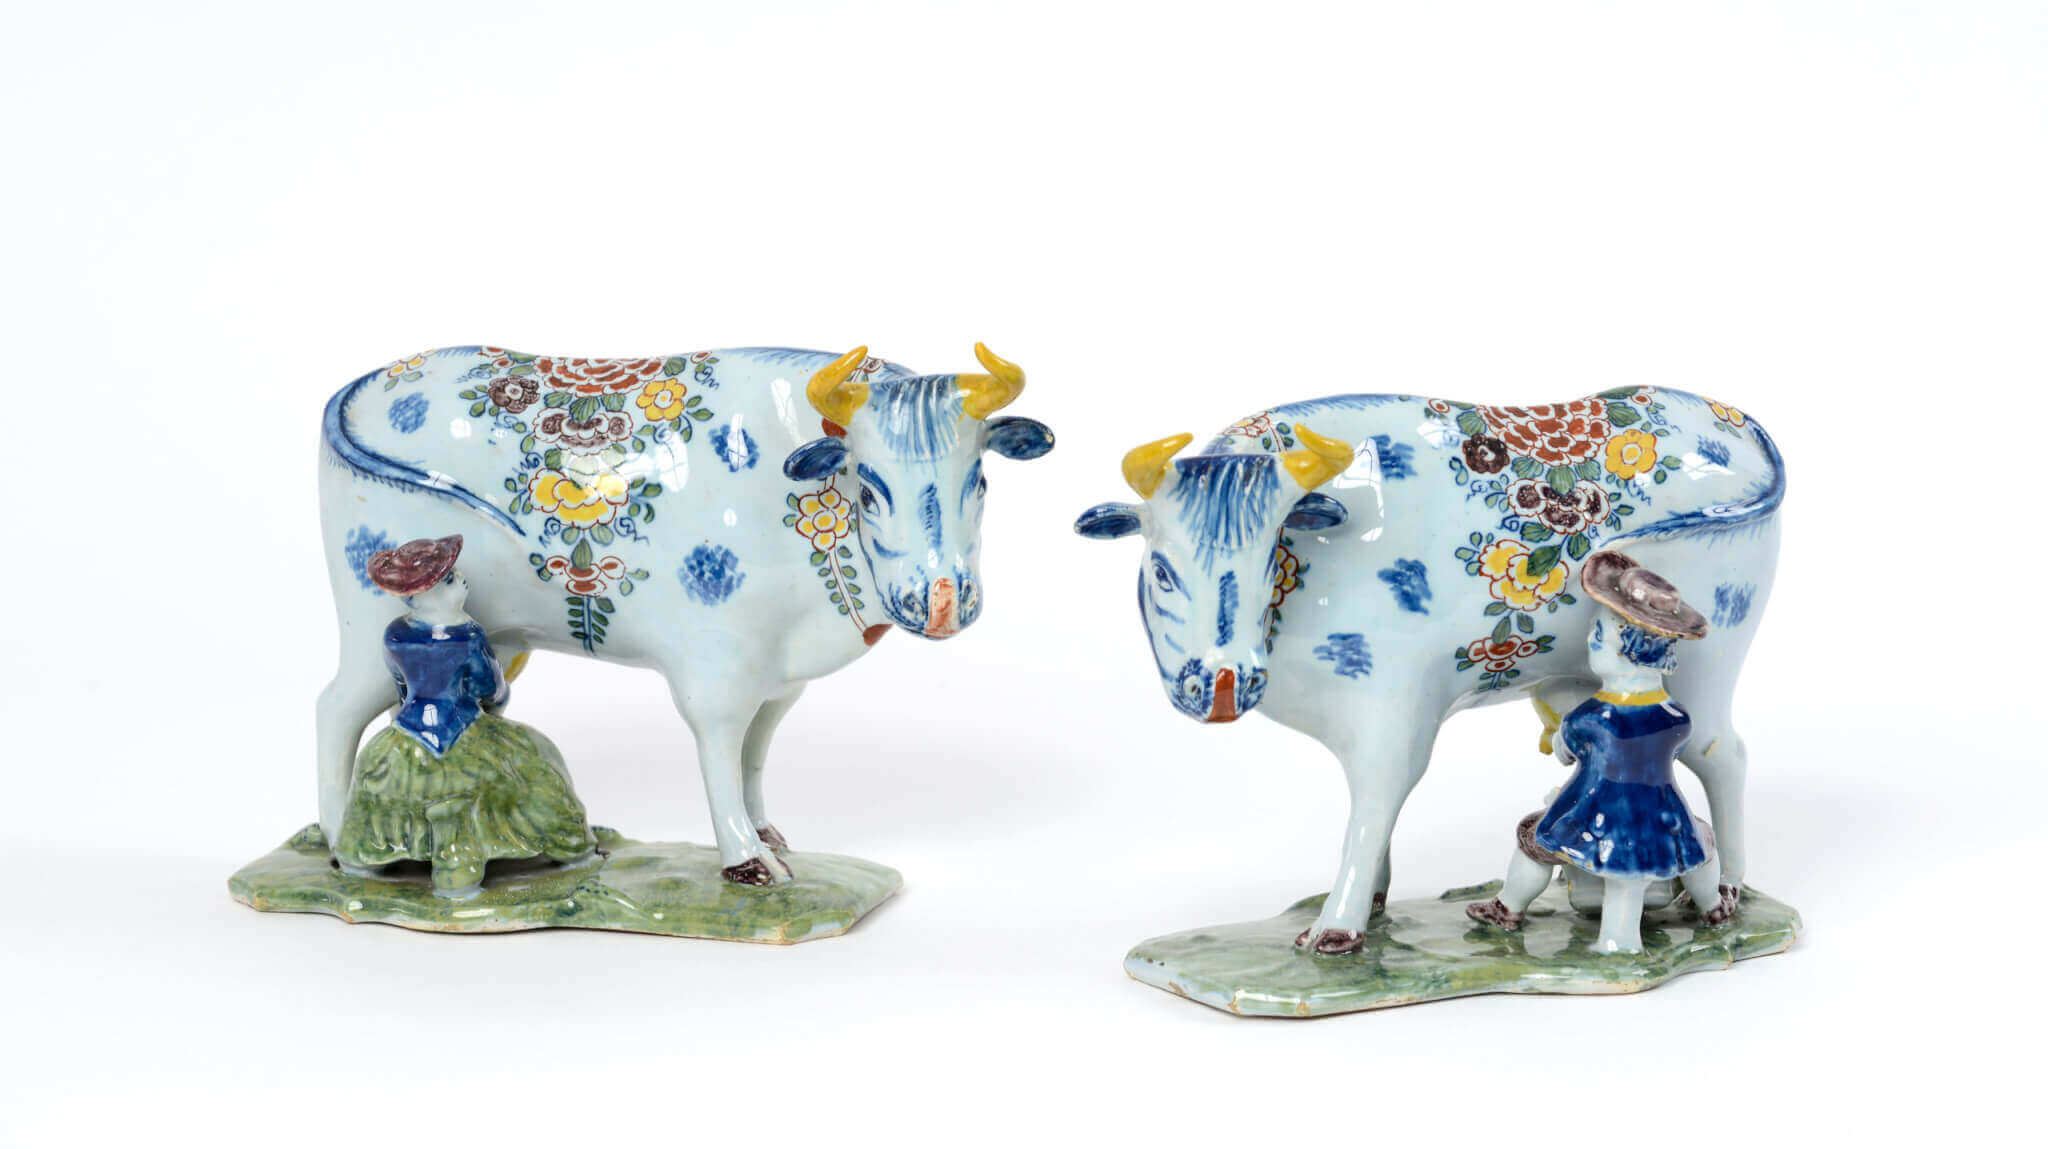 Polychrome Delftware milking group